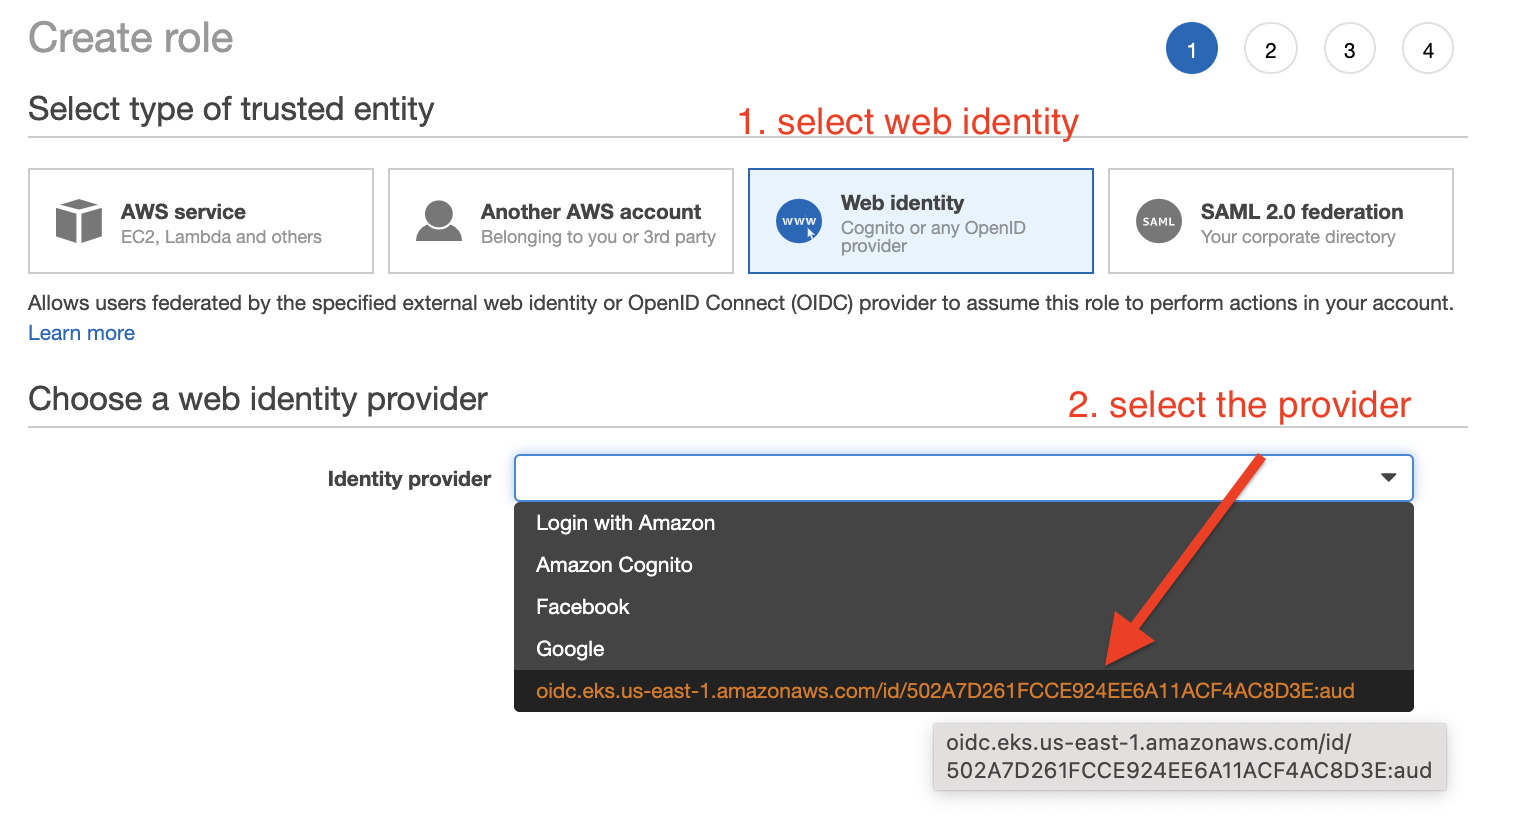 Selecting a web identity and provider